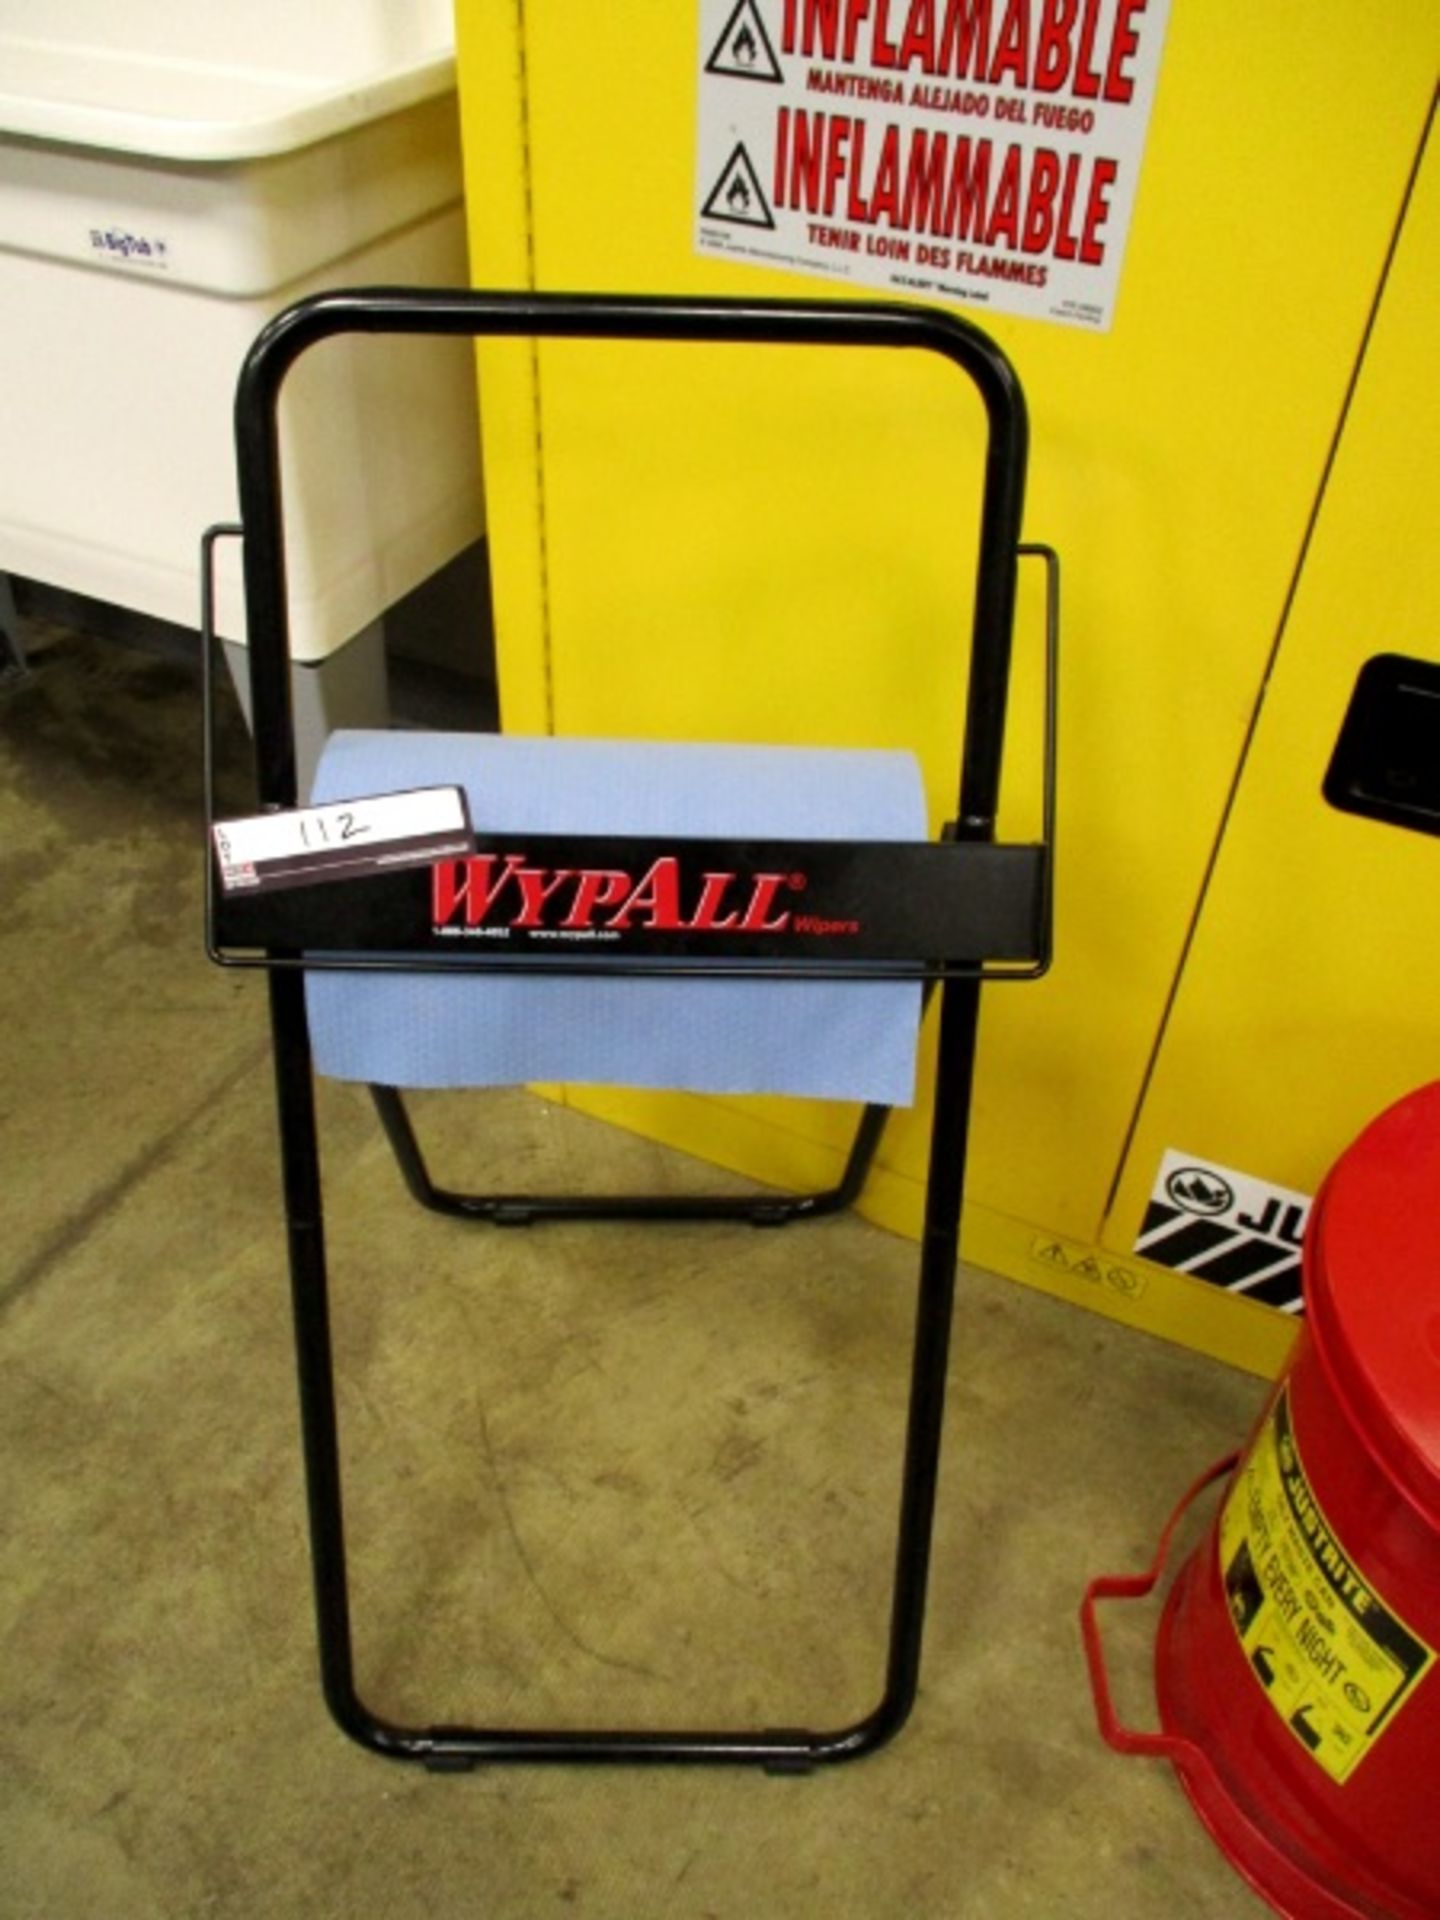 Justrite Sure-Grip EX Flammable Liquid Storage Cabinet, 18" x 43" x 45"H, with Wydall Paper cloth - Image 3 of 4